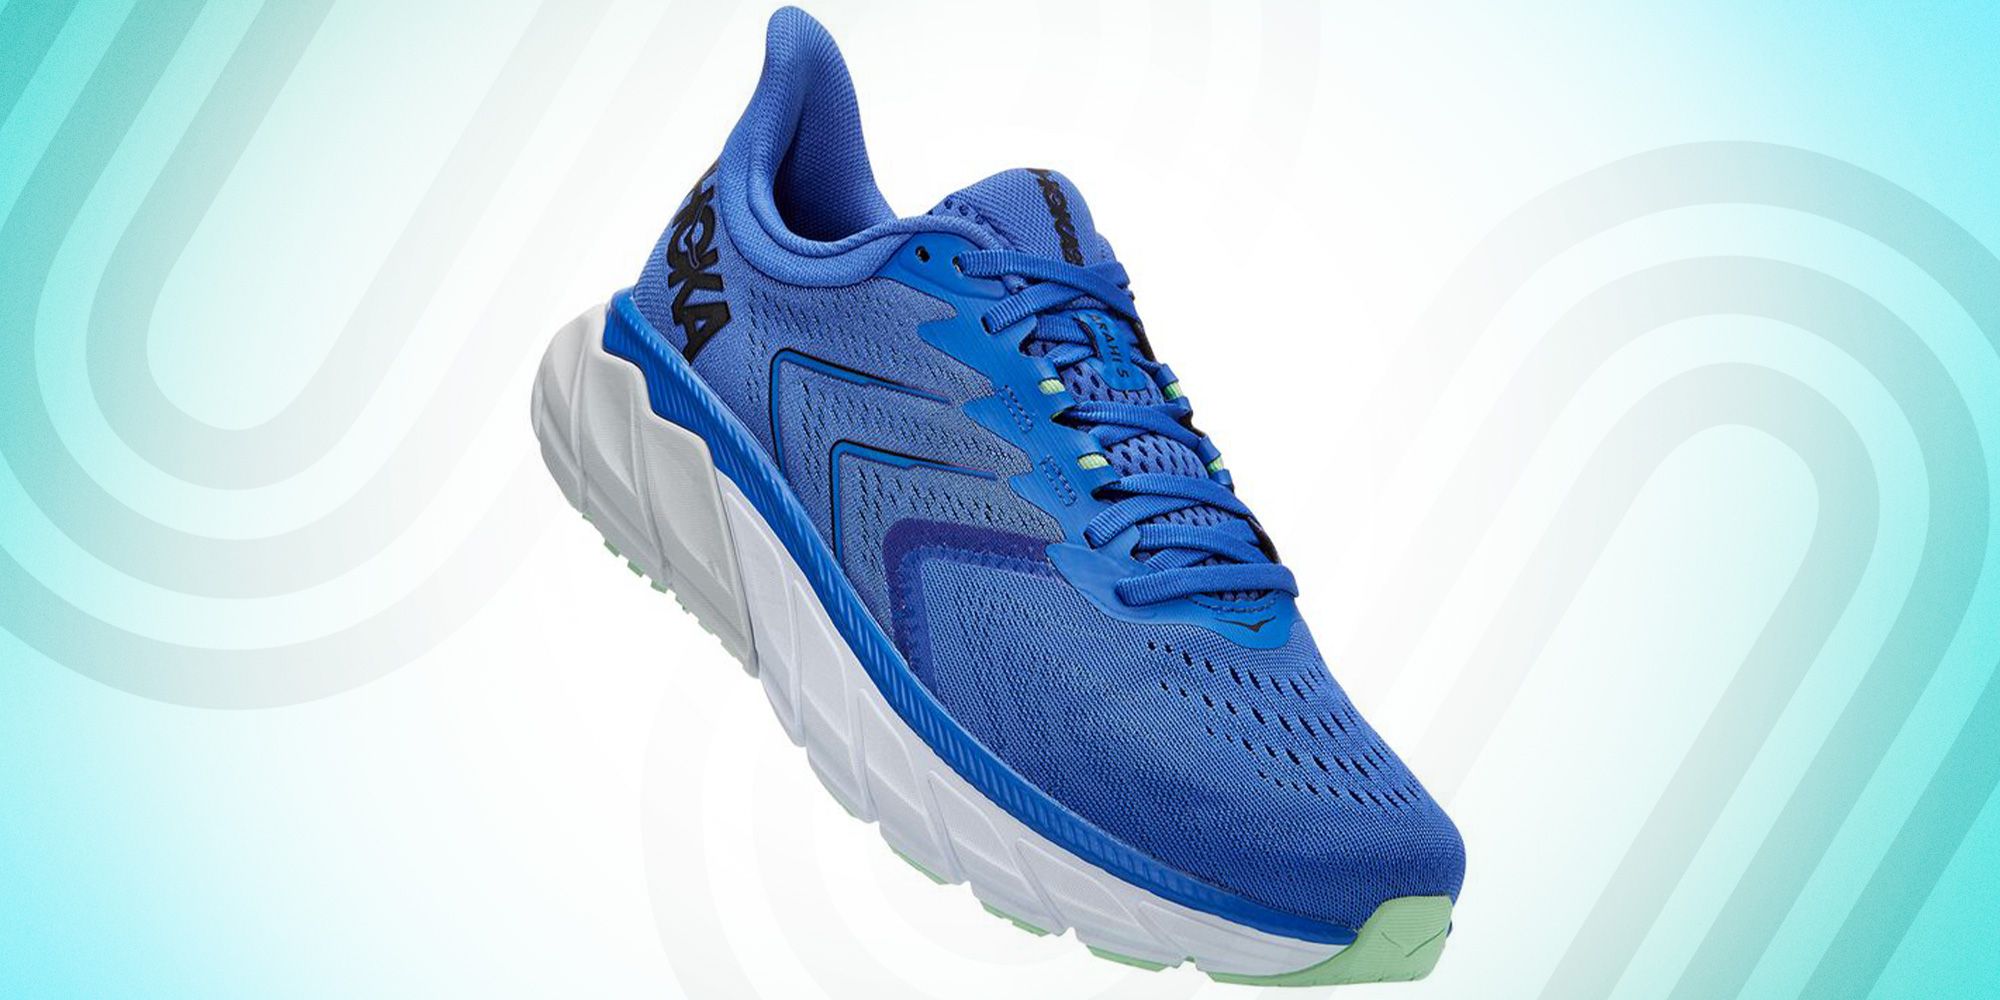 Best Running Shoes For Flat Feet Solereview | vlr.eng.br